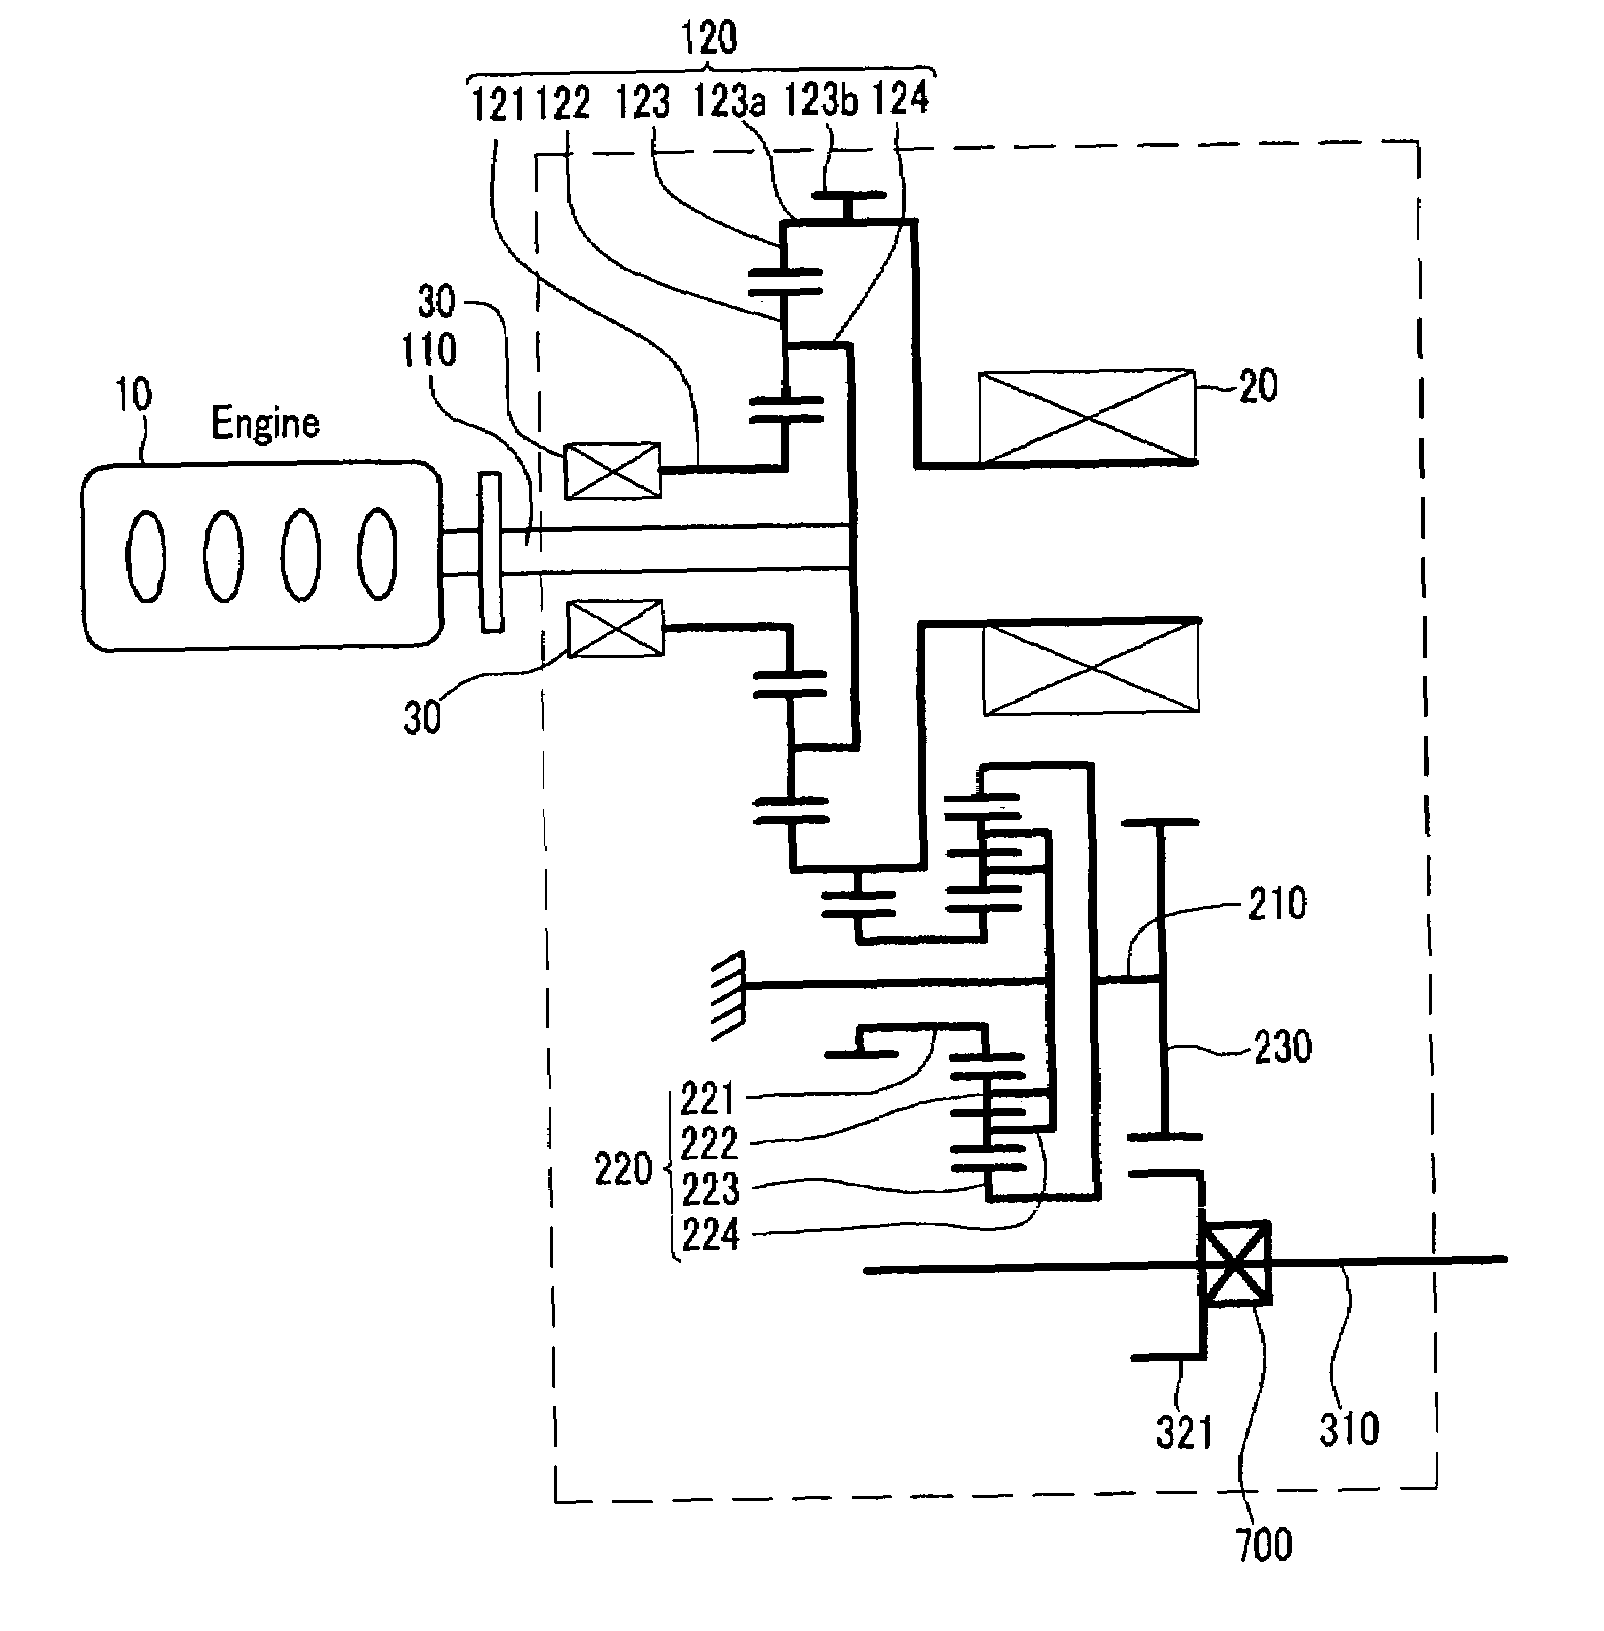 Power delivery system of a hybrid vehicle